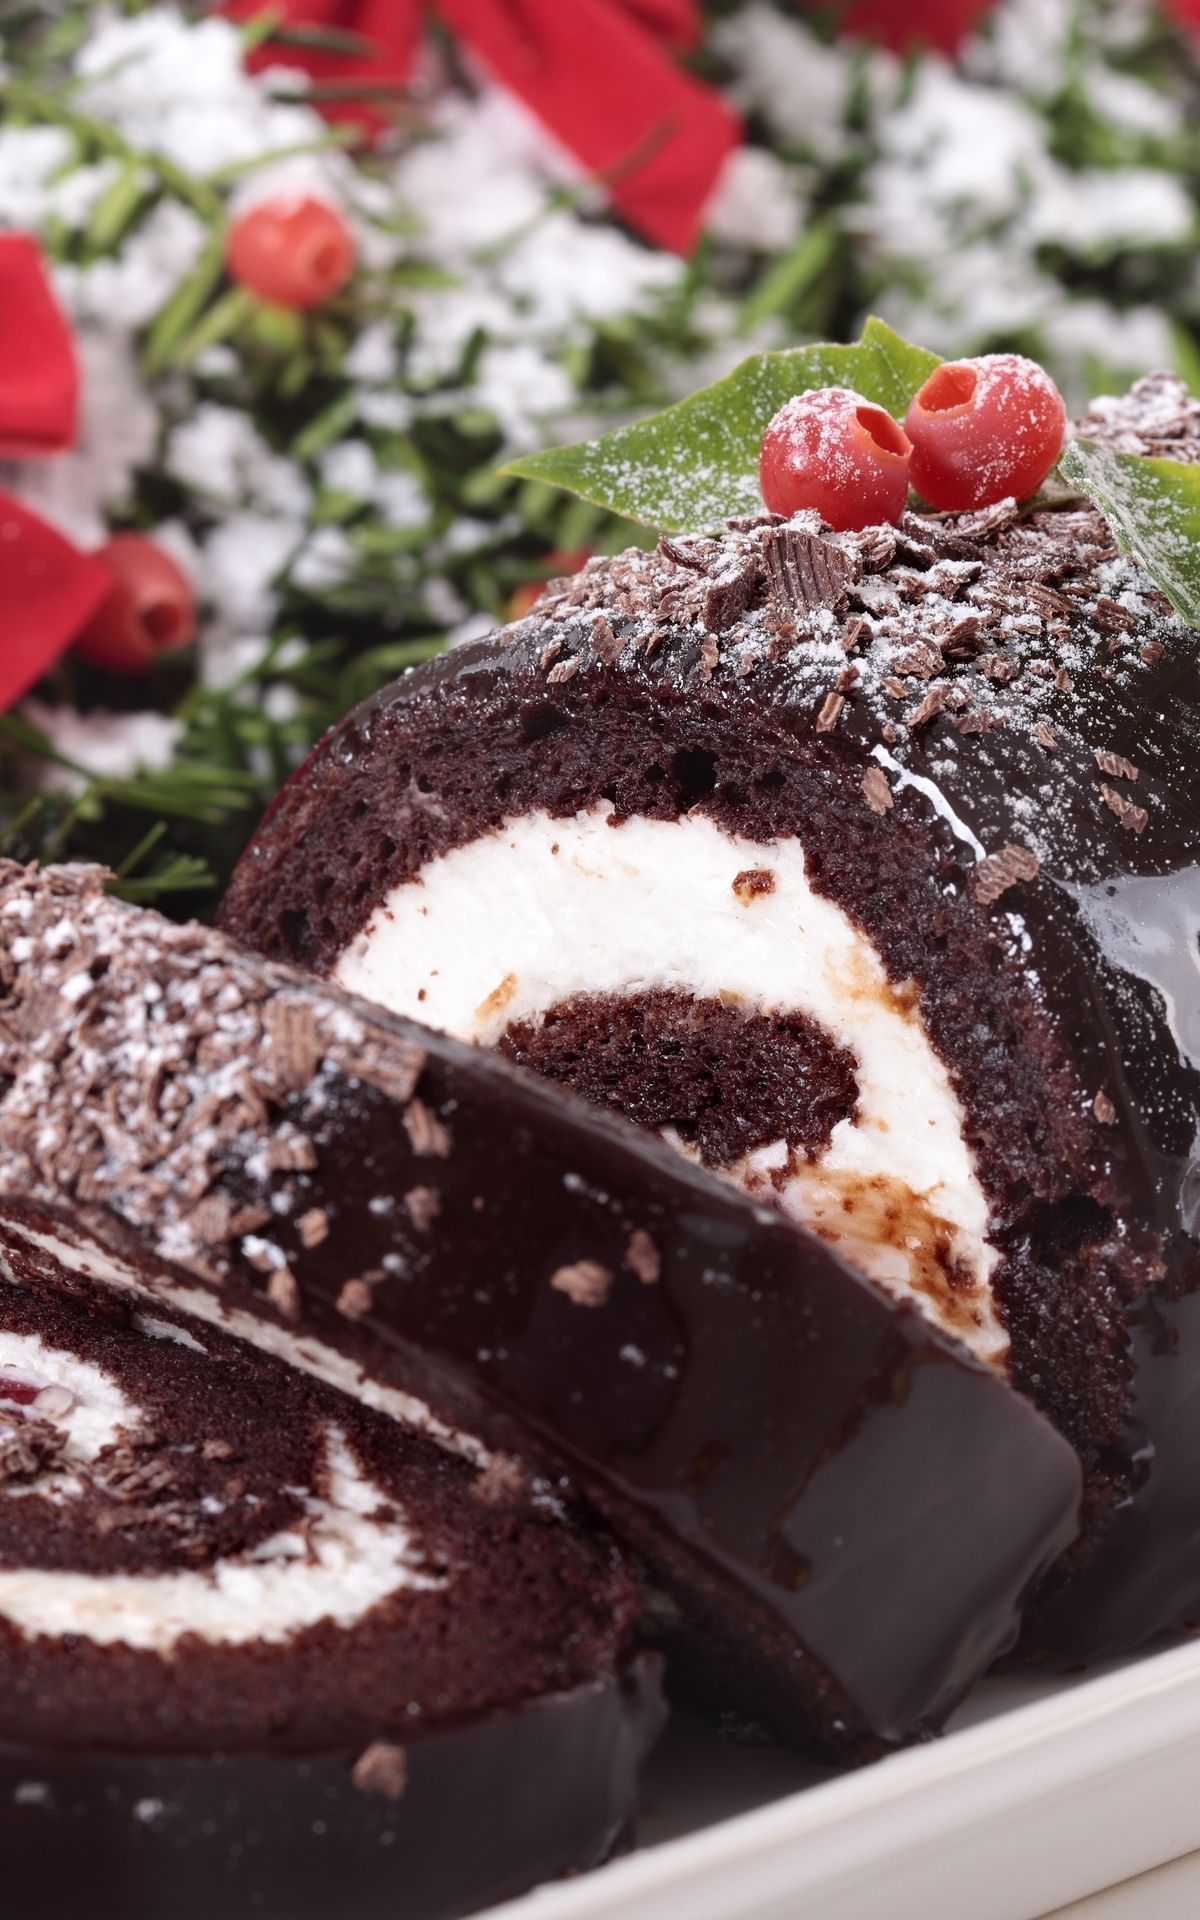 Image: Roll, chocolate, sweet, berries, candles, holiday, christmas